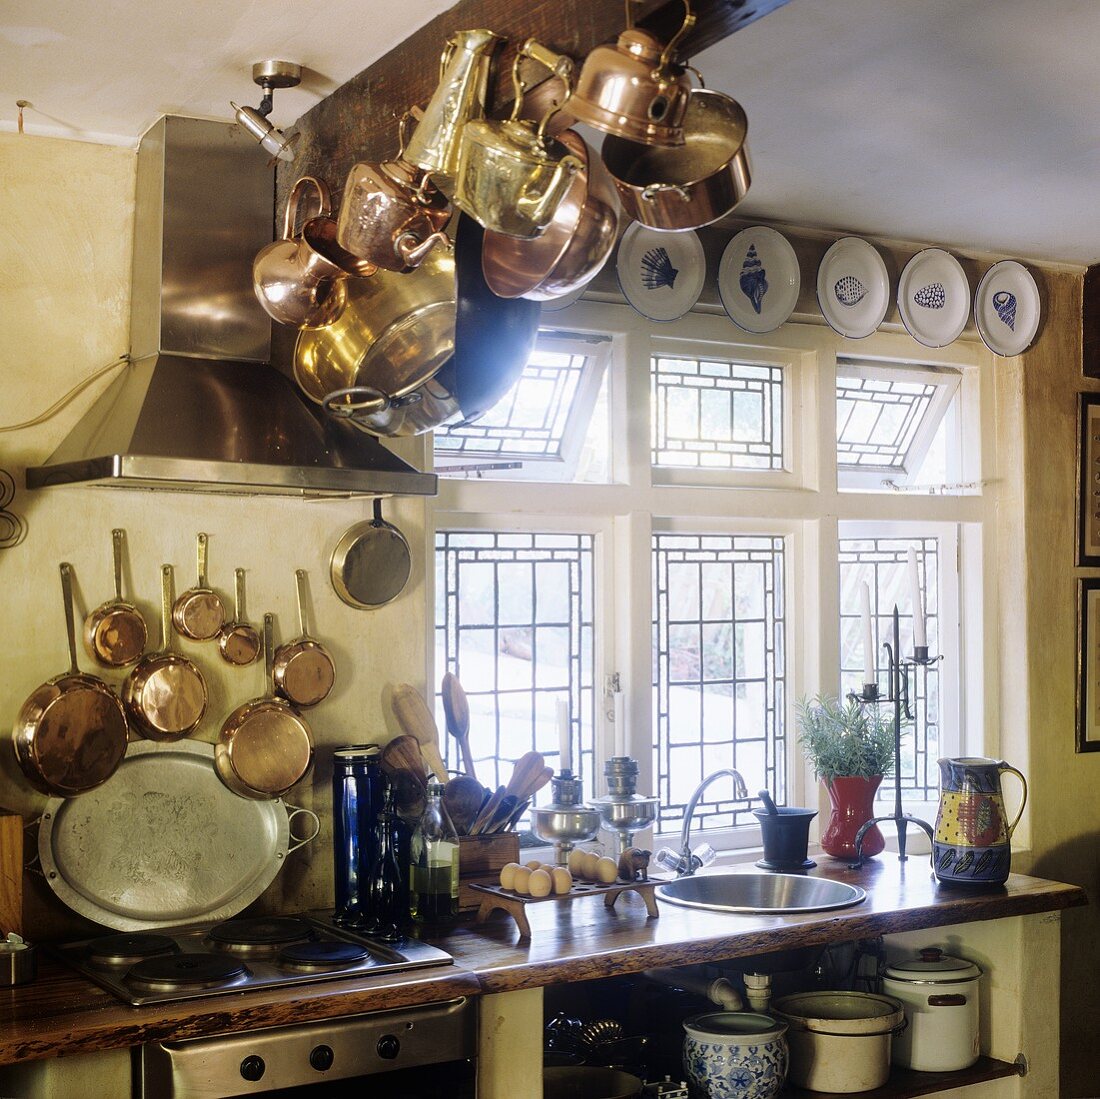 Copper pots hanging from a wooden ceiling beam in the kitchen of a country house